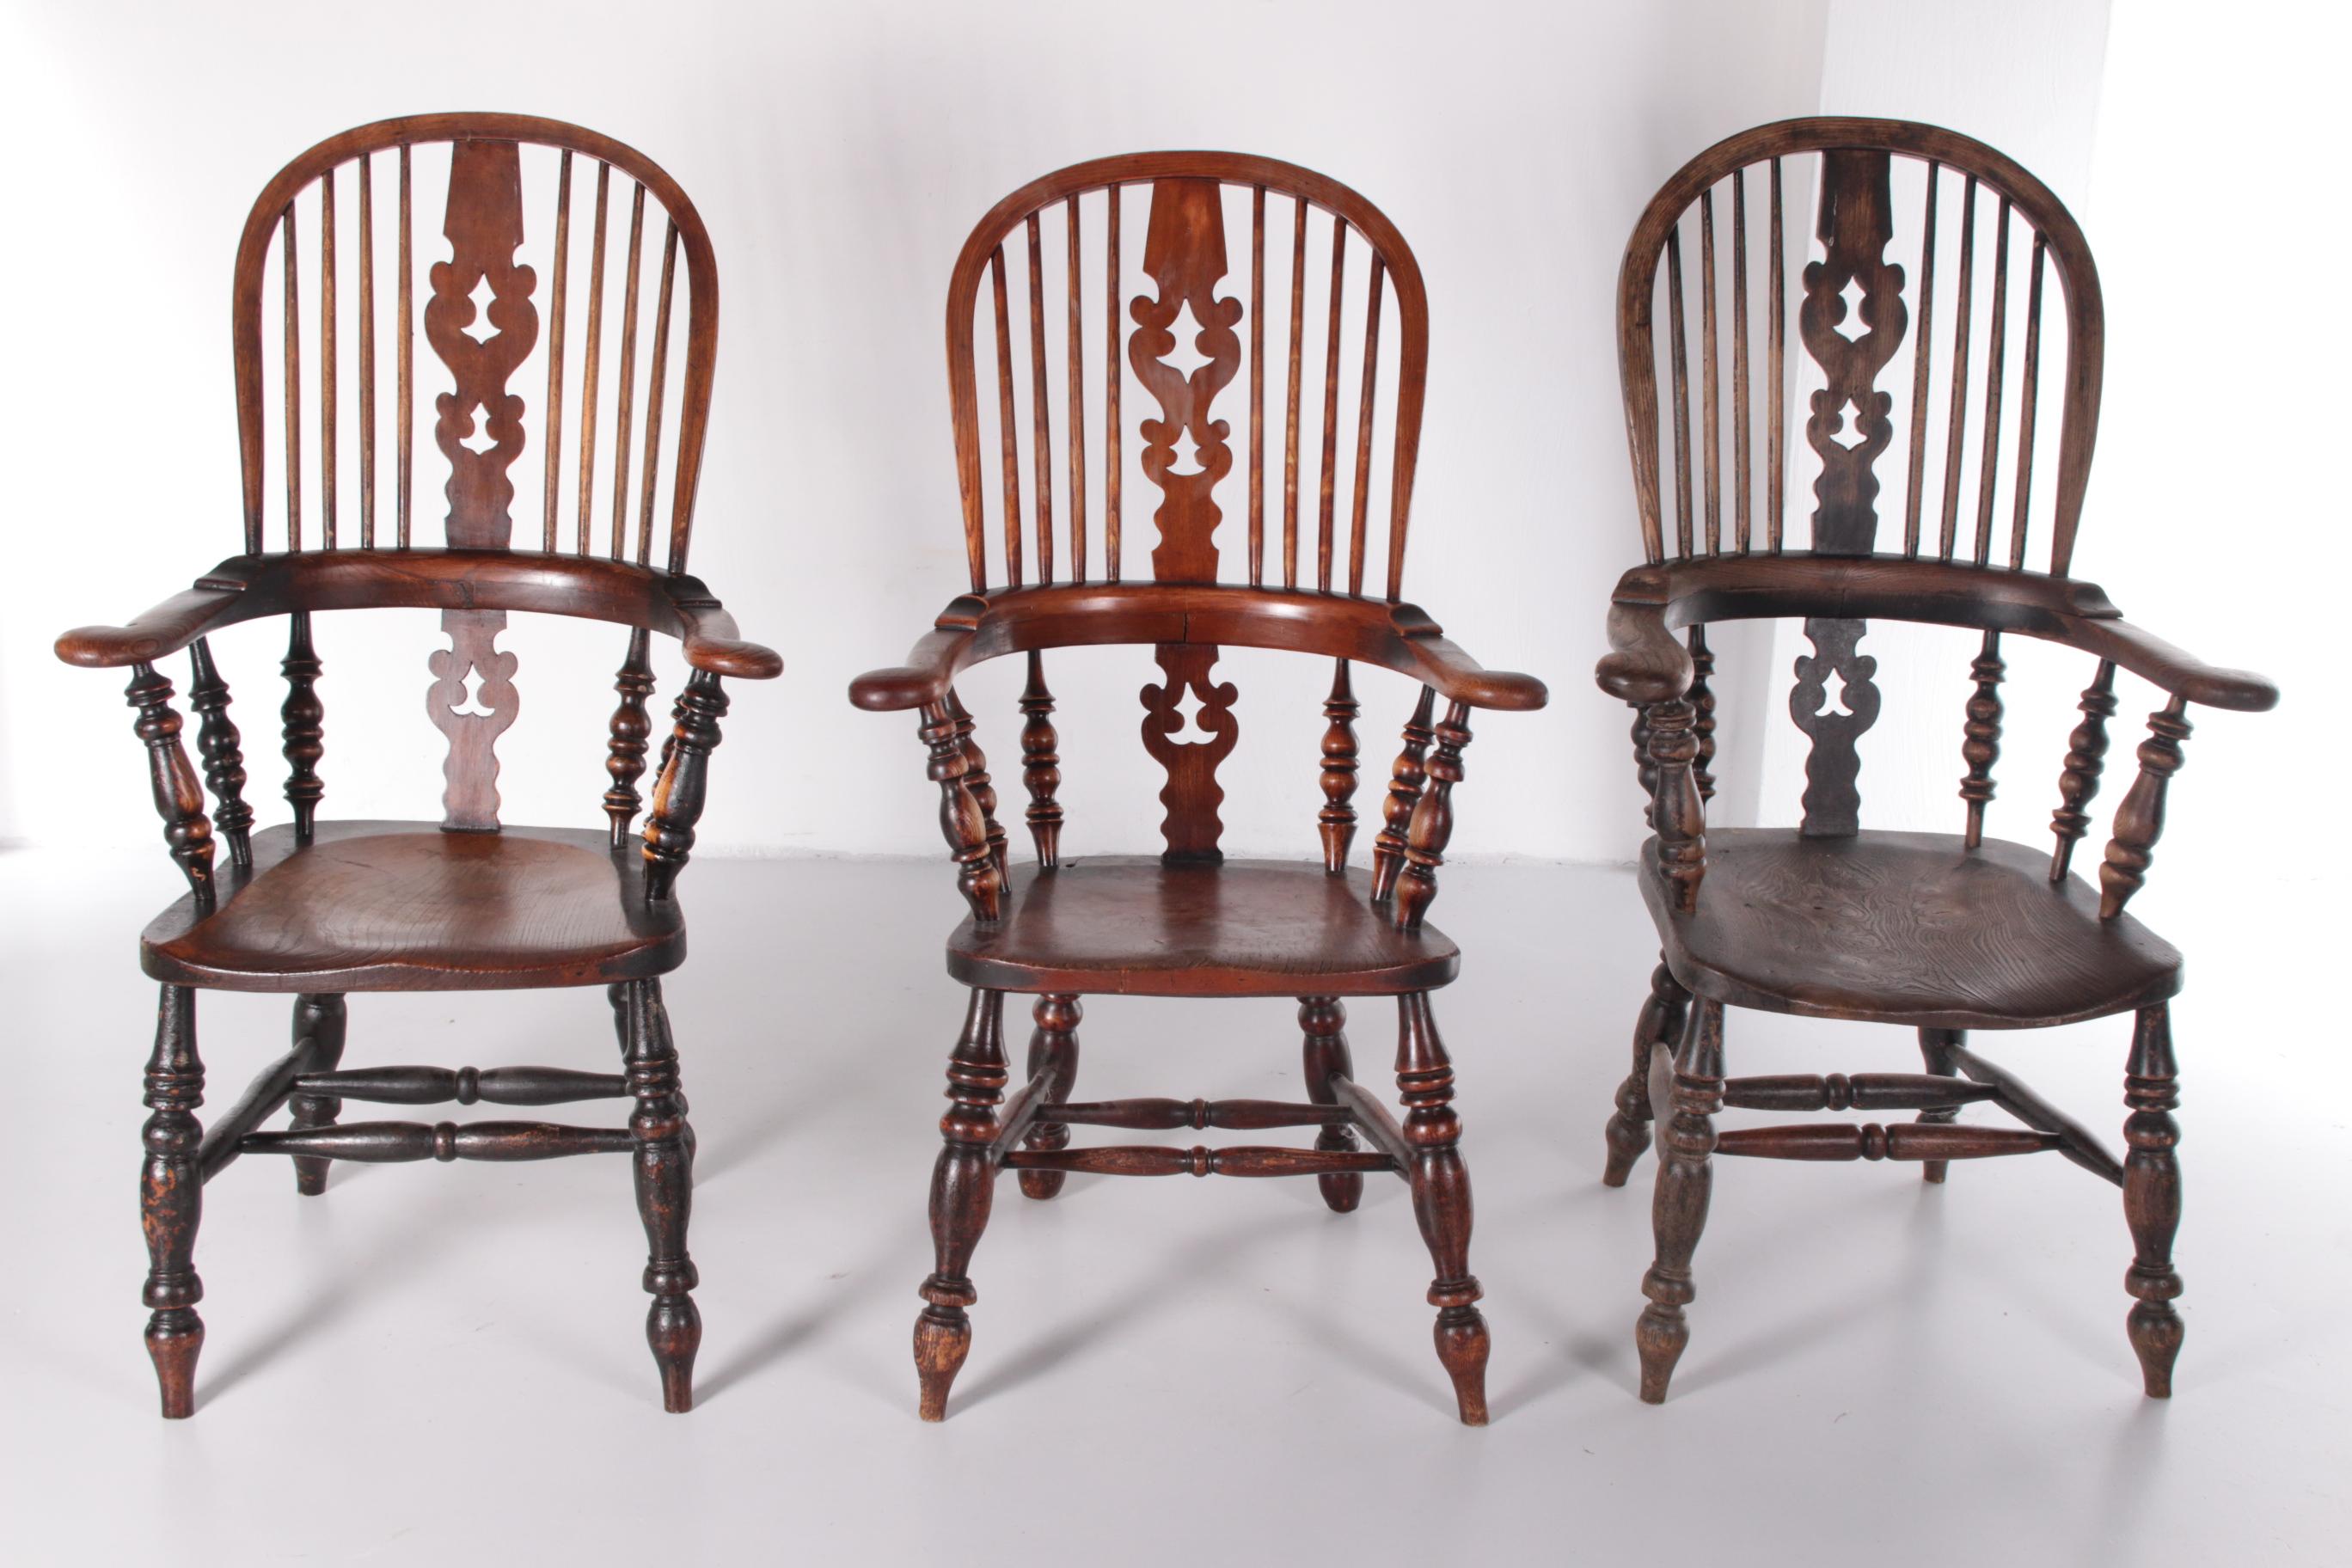 A well matched pair of 19th century yew and elm seated high back windsor chairs this is a quintessential Nottinghamshire design.

These models were designed around 1840 and made around 1900.

The patina is beautiful and robust, these chairs have